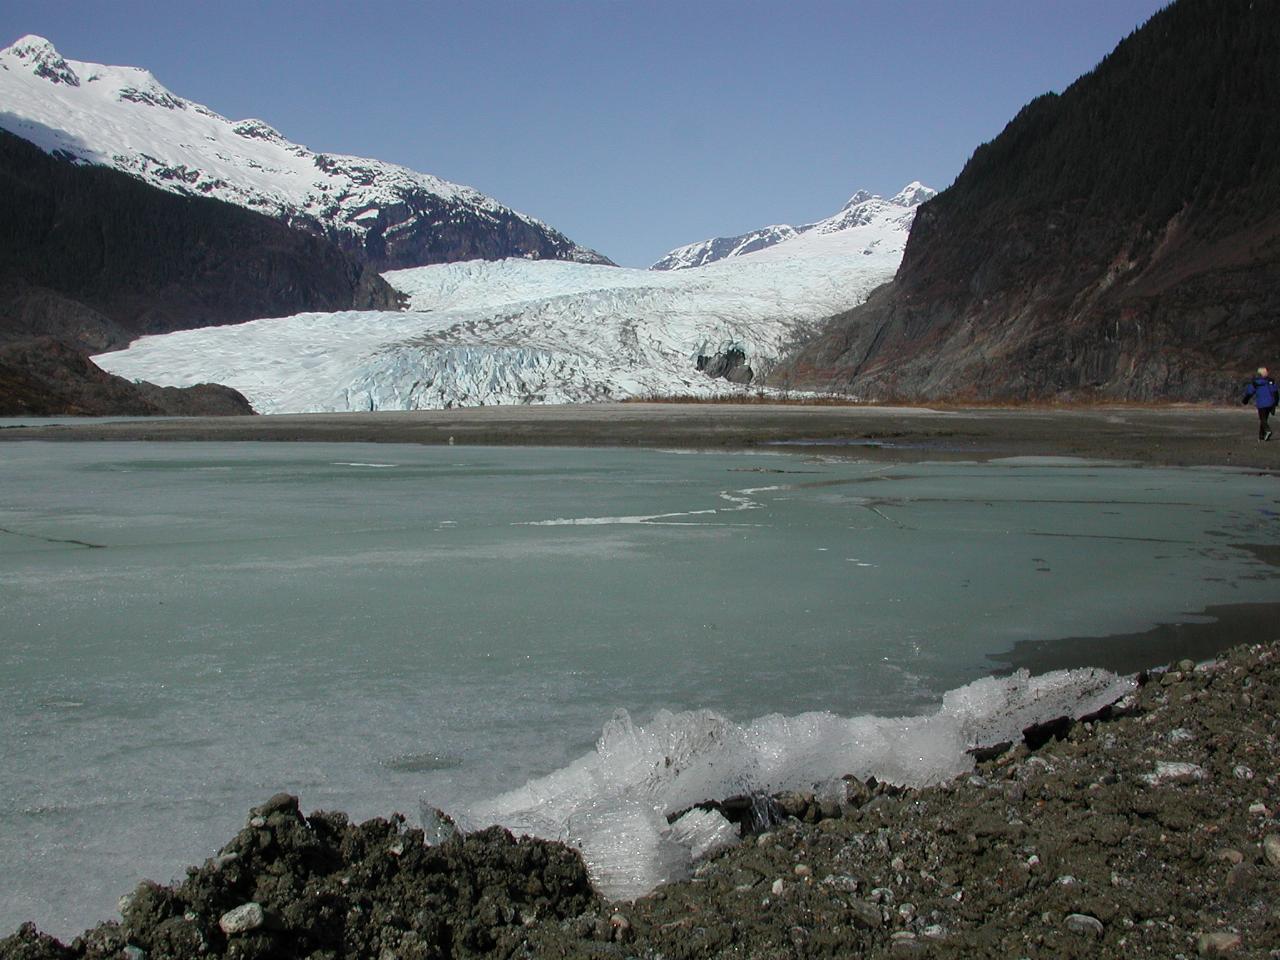 Mendenhall Glacier, just outside Juneau and ice in the foreground